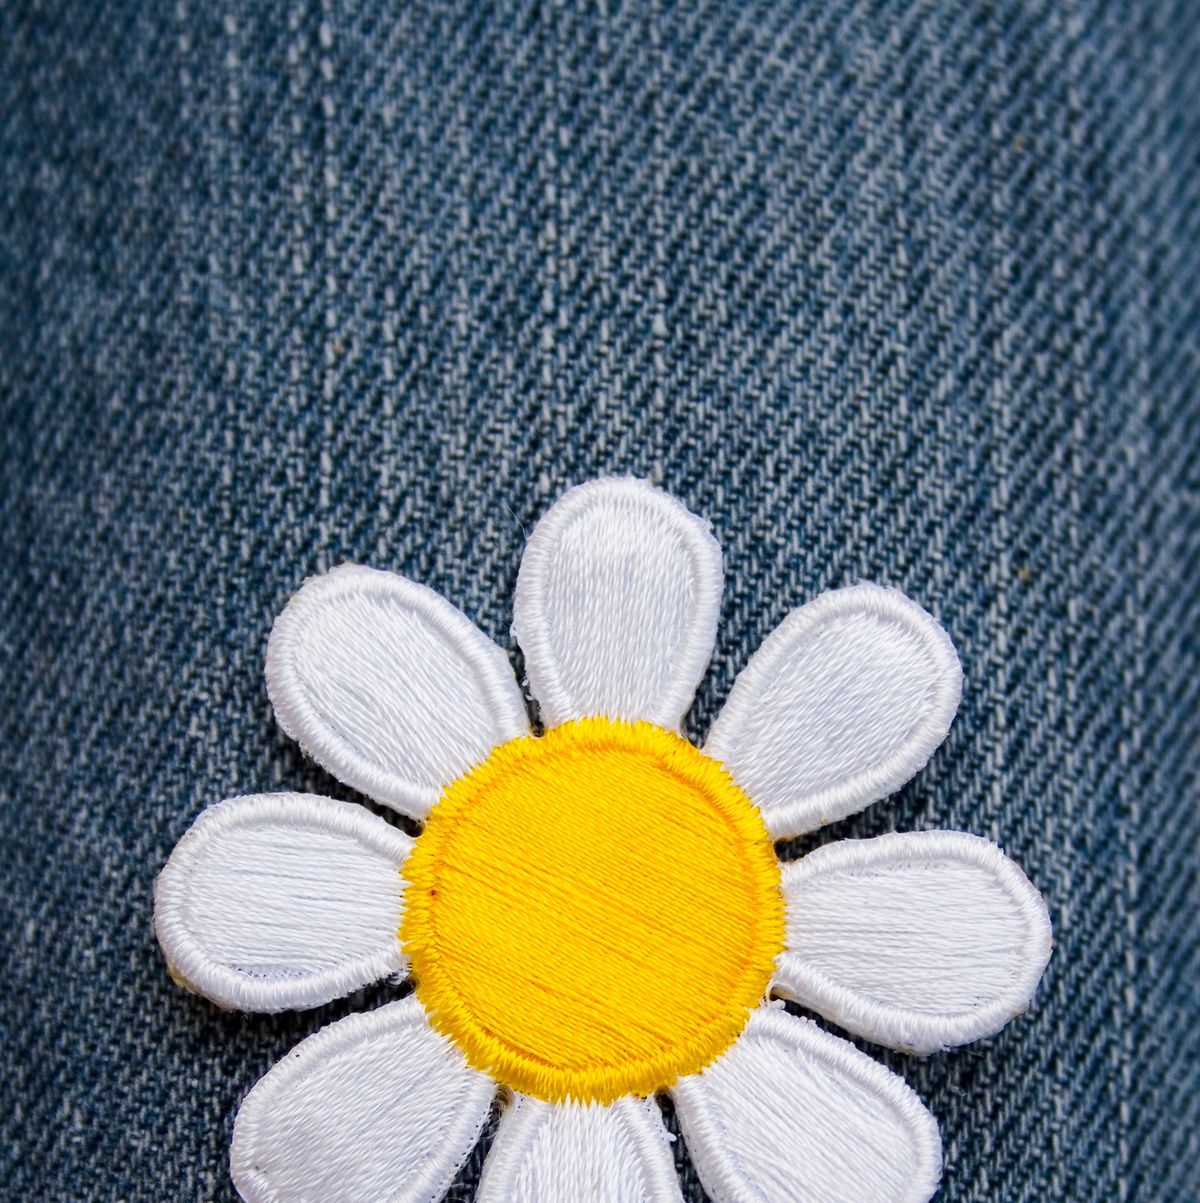 Iron-On Felt Patches: Cute & Fun Project for Kids